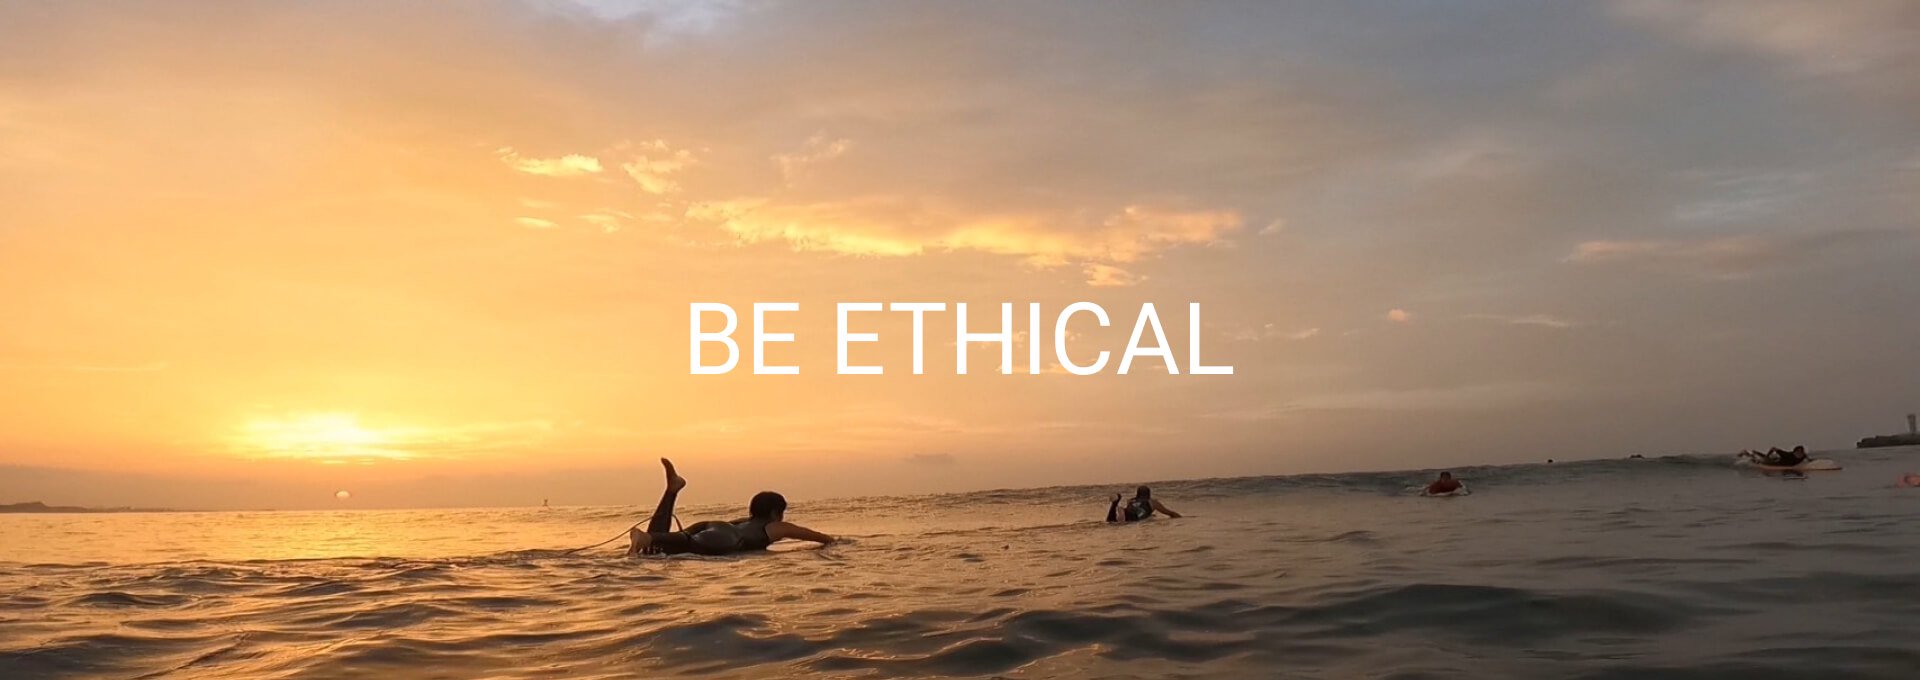 BE ETHICAL